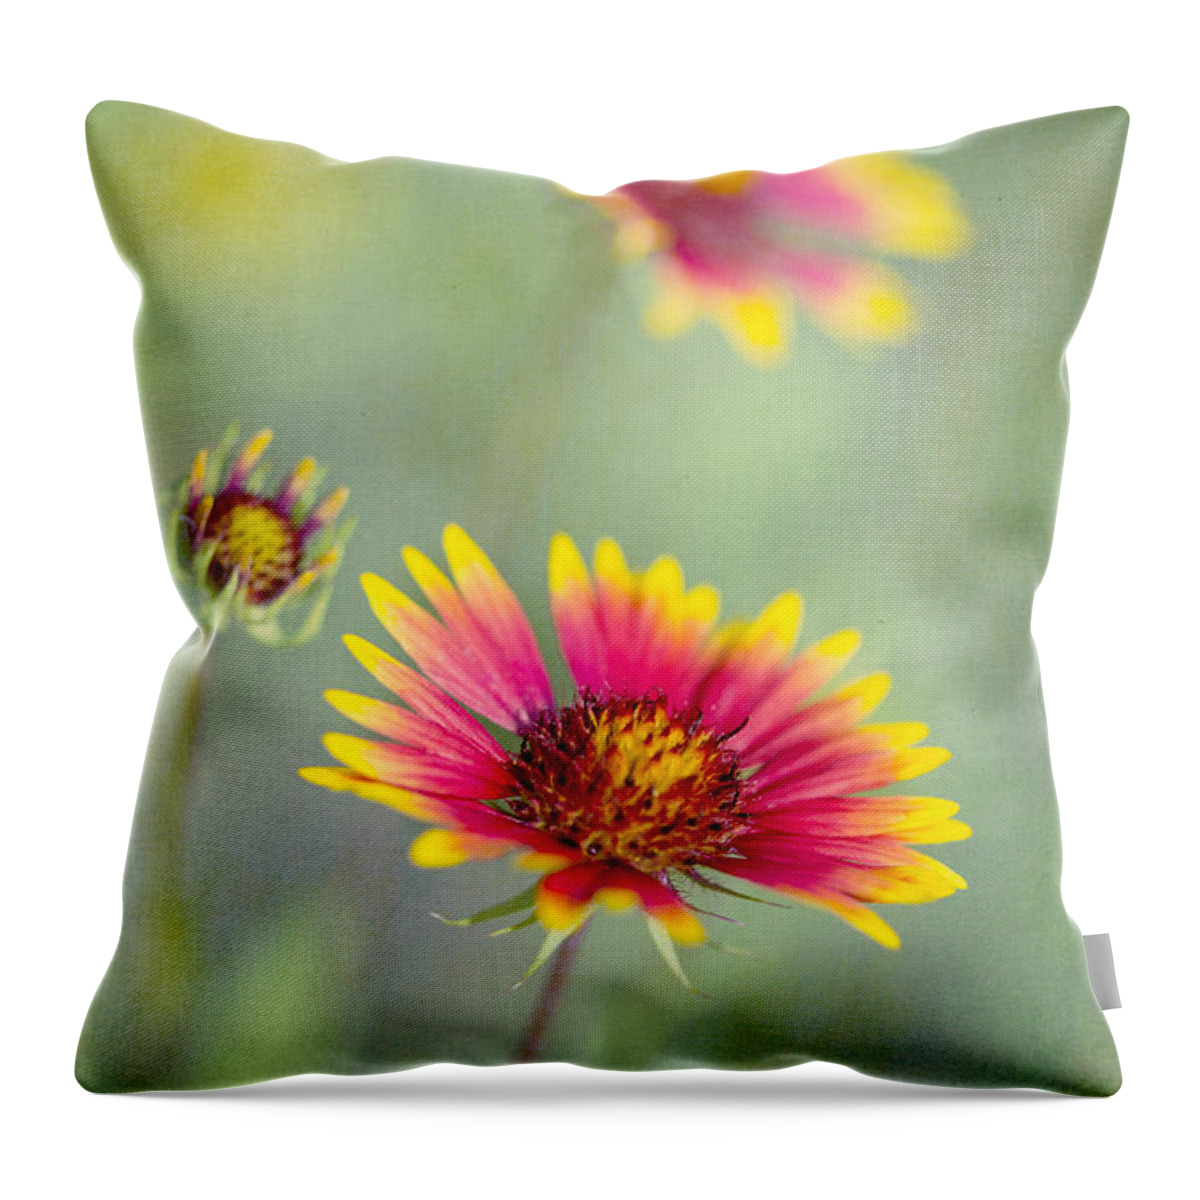 Blanket Flowers Throw Pillow featuring the photograph Blanket Flowers by Elena Nosyreva